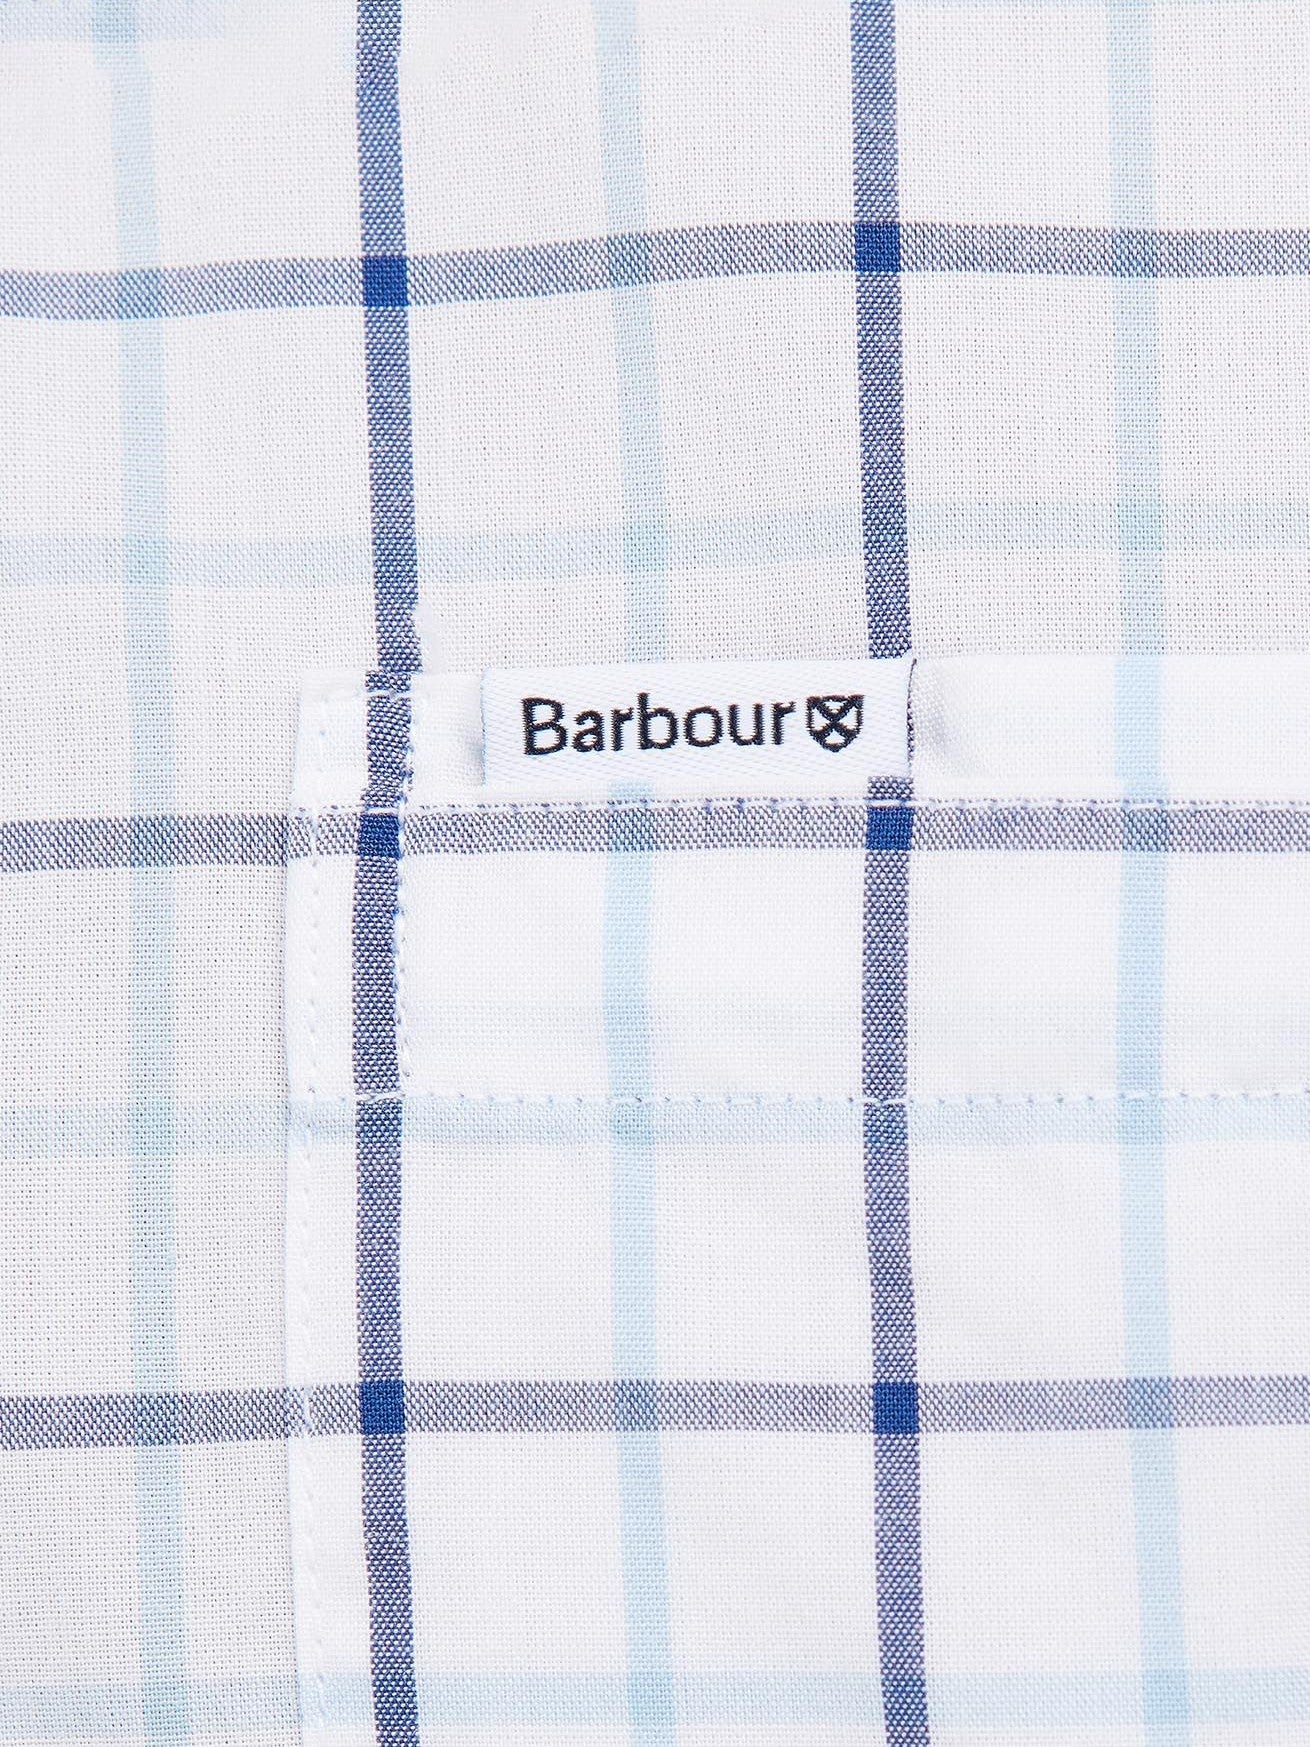 Barbour MSH5080 Bradwell Tailored Shirt camicia uomo